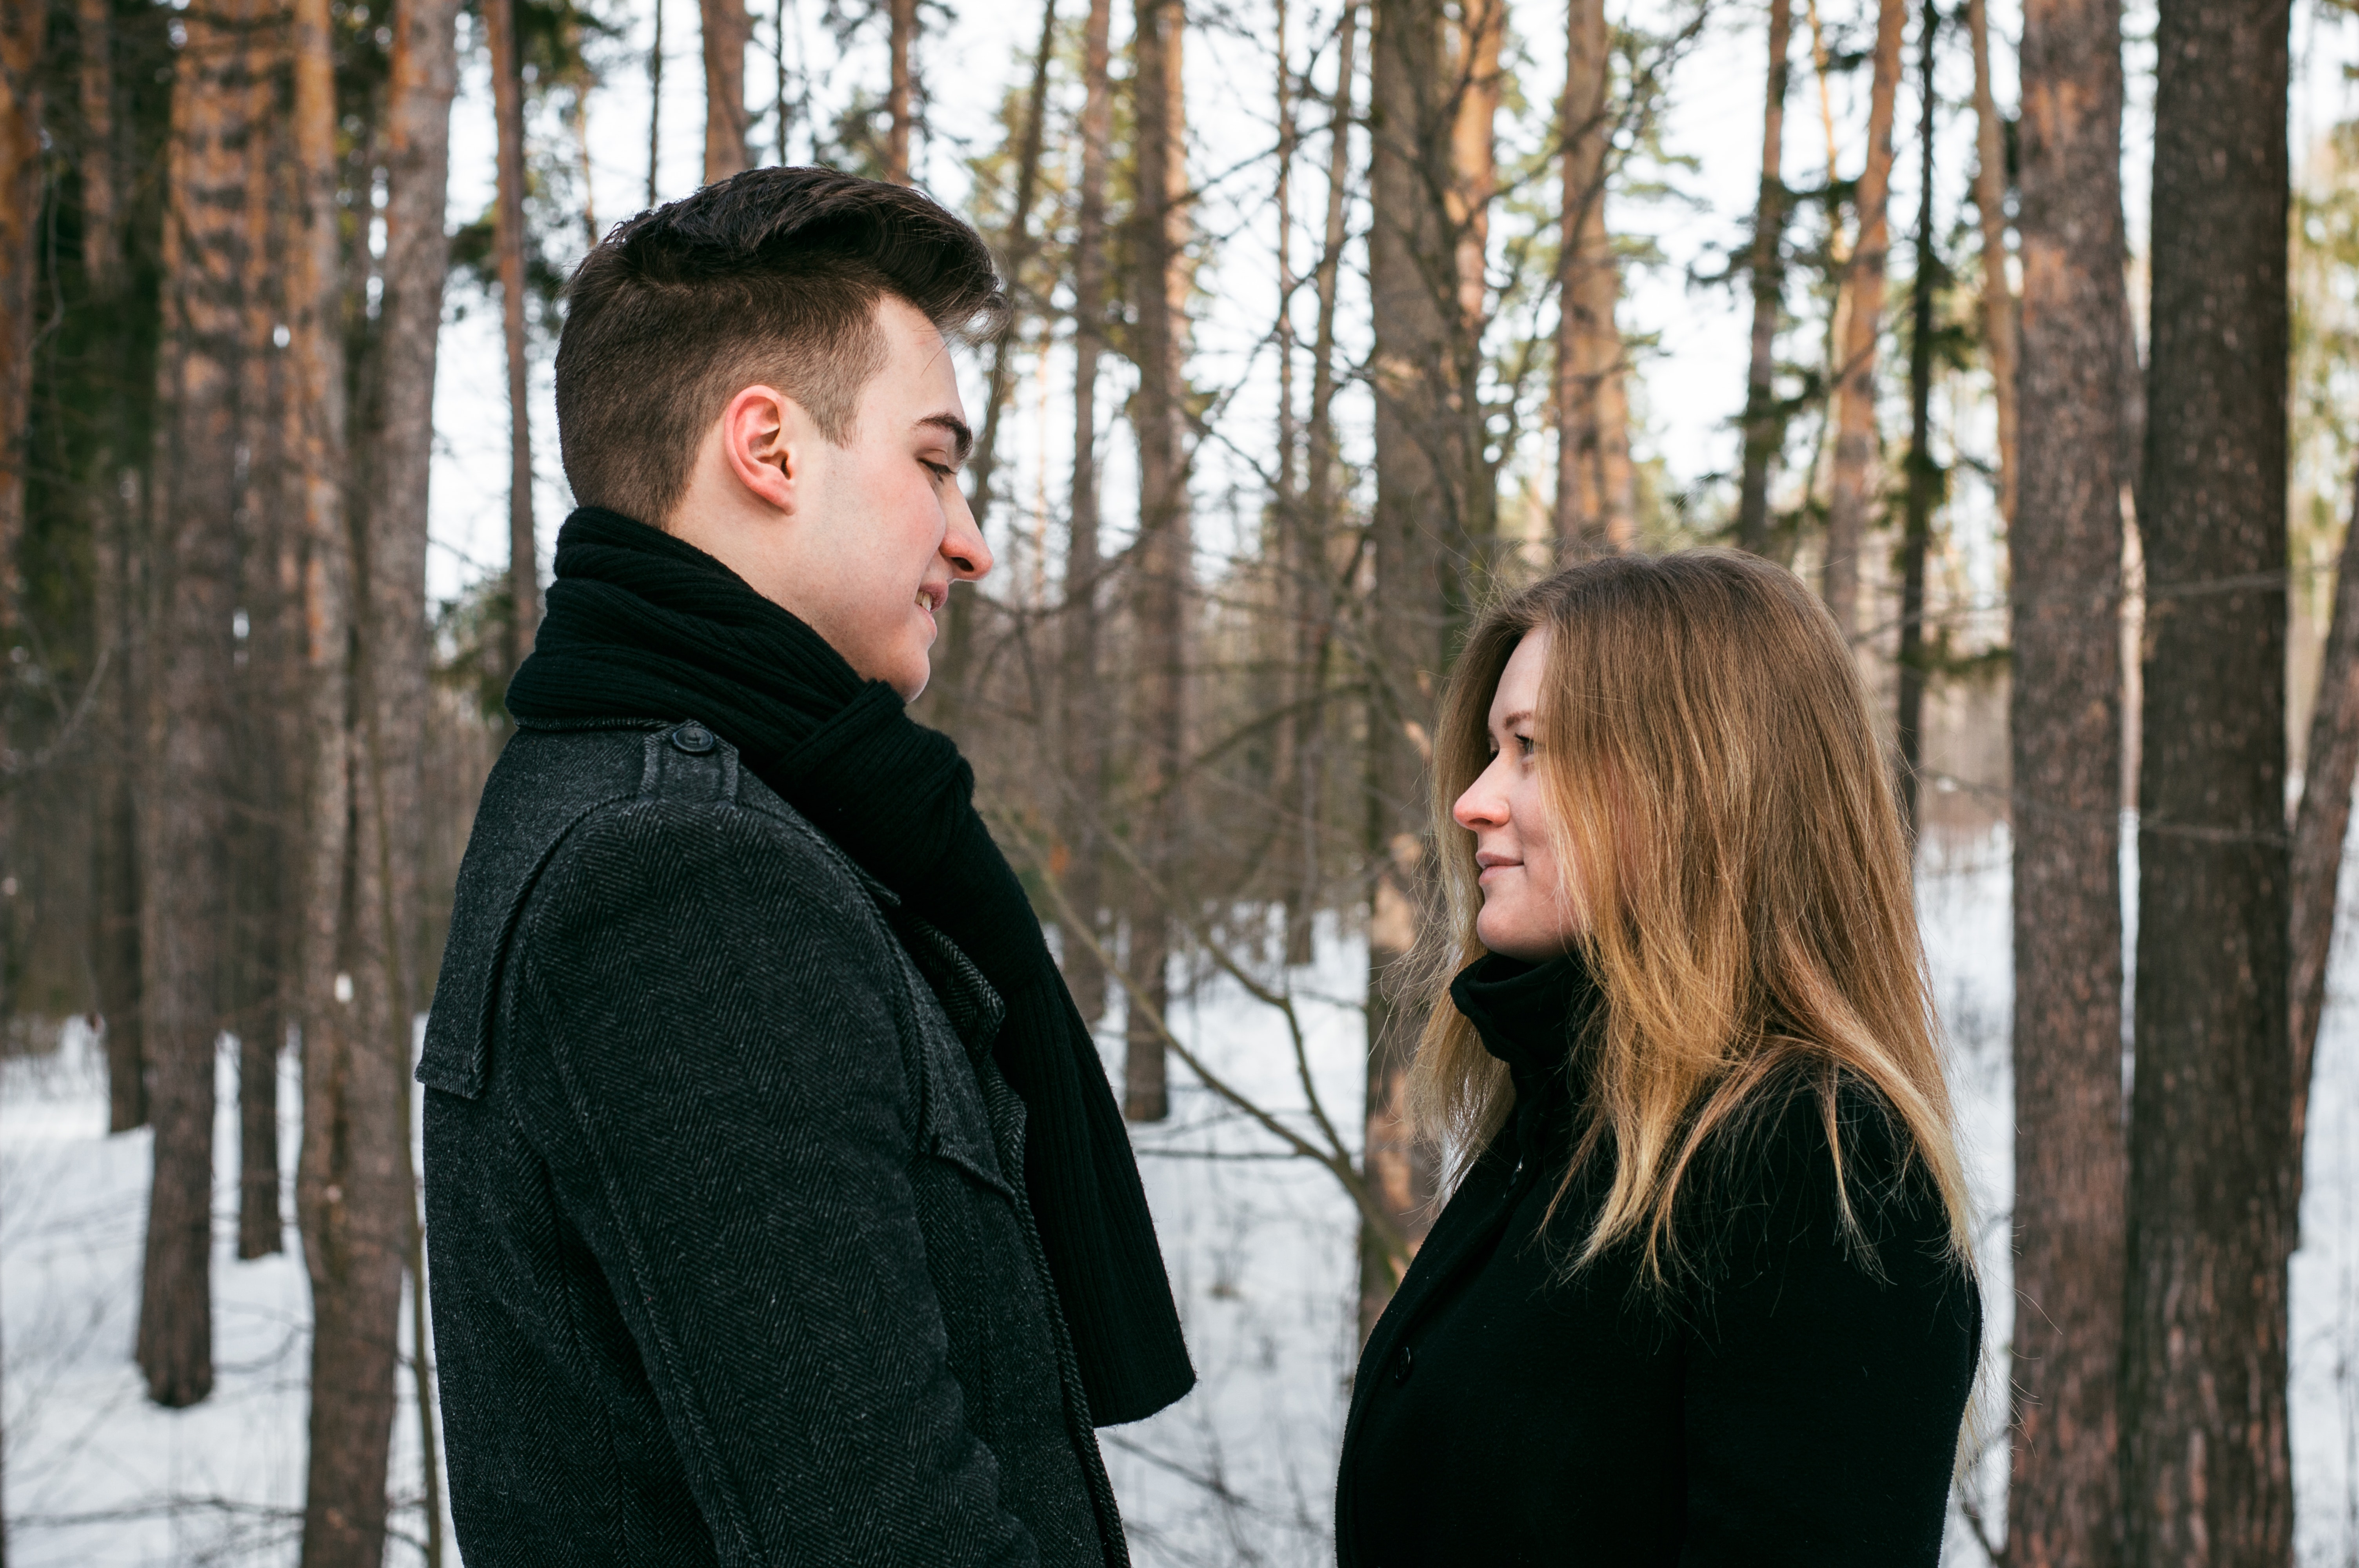 Man and Woman Wearing Black Coats Standing Near Snow-covered Trees, Affection, Outdoors, Woman, Winter, HQ Photo